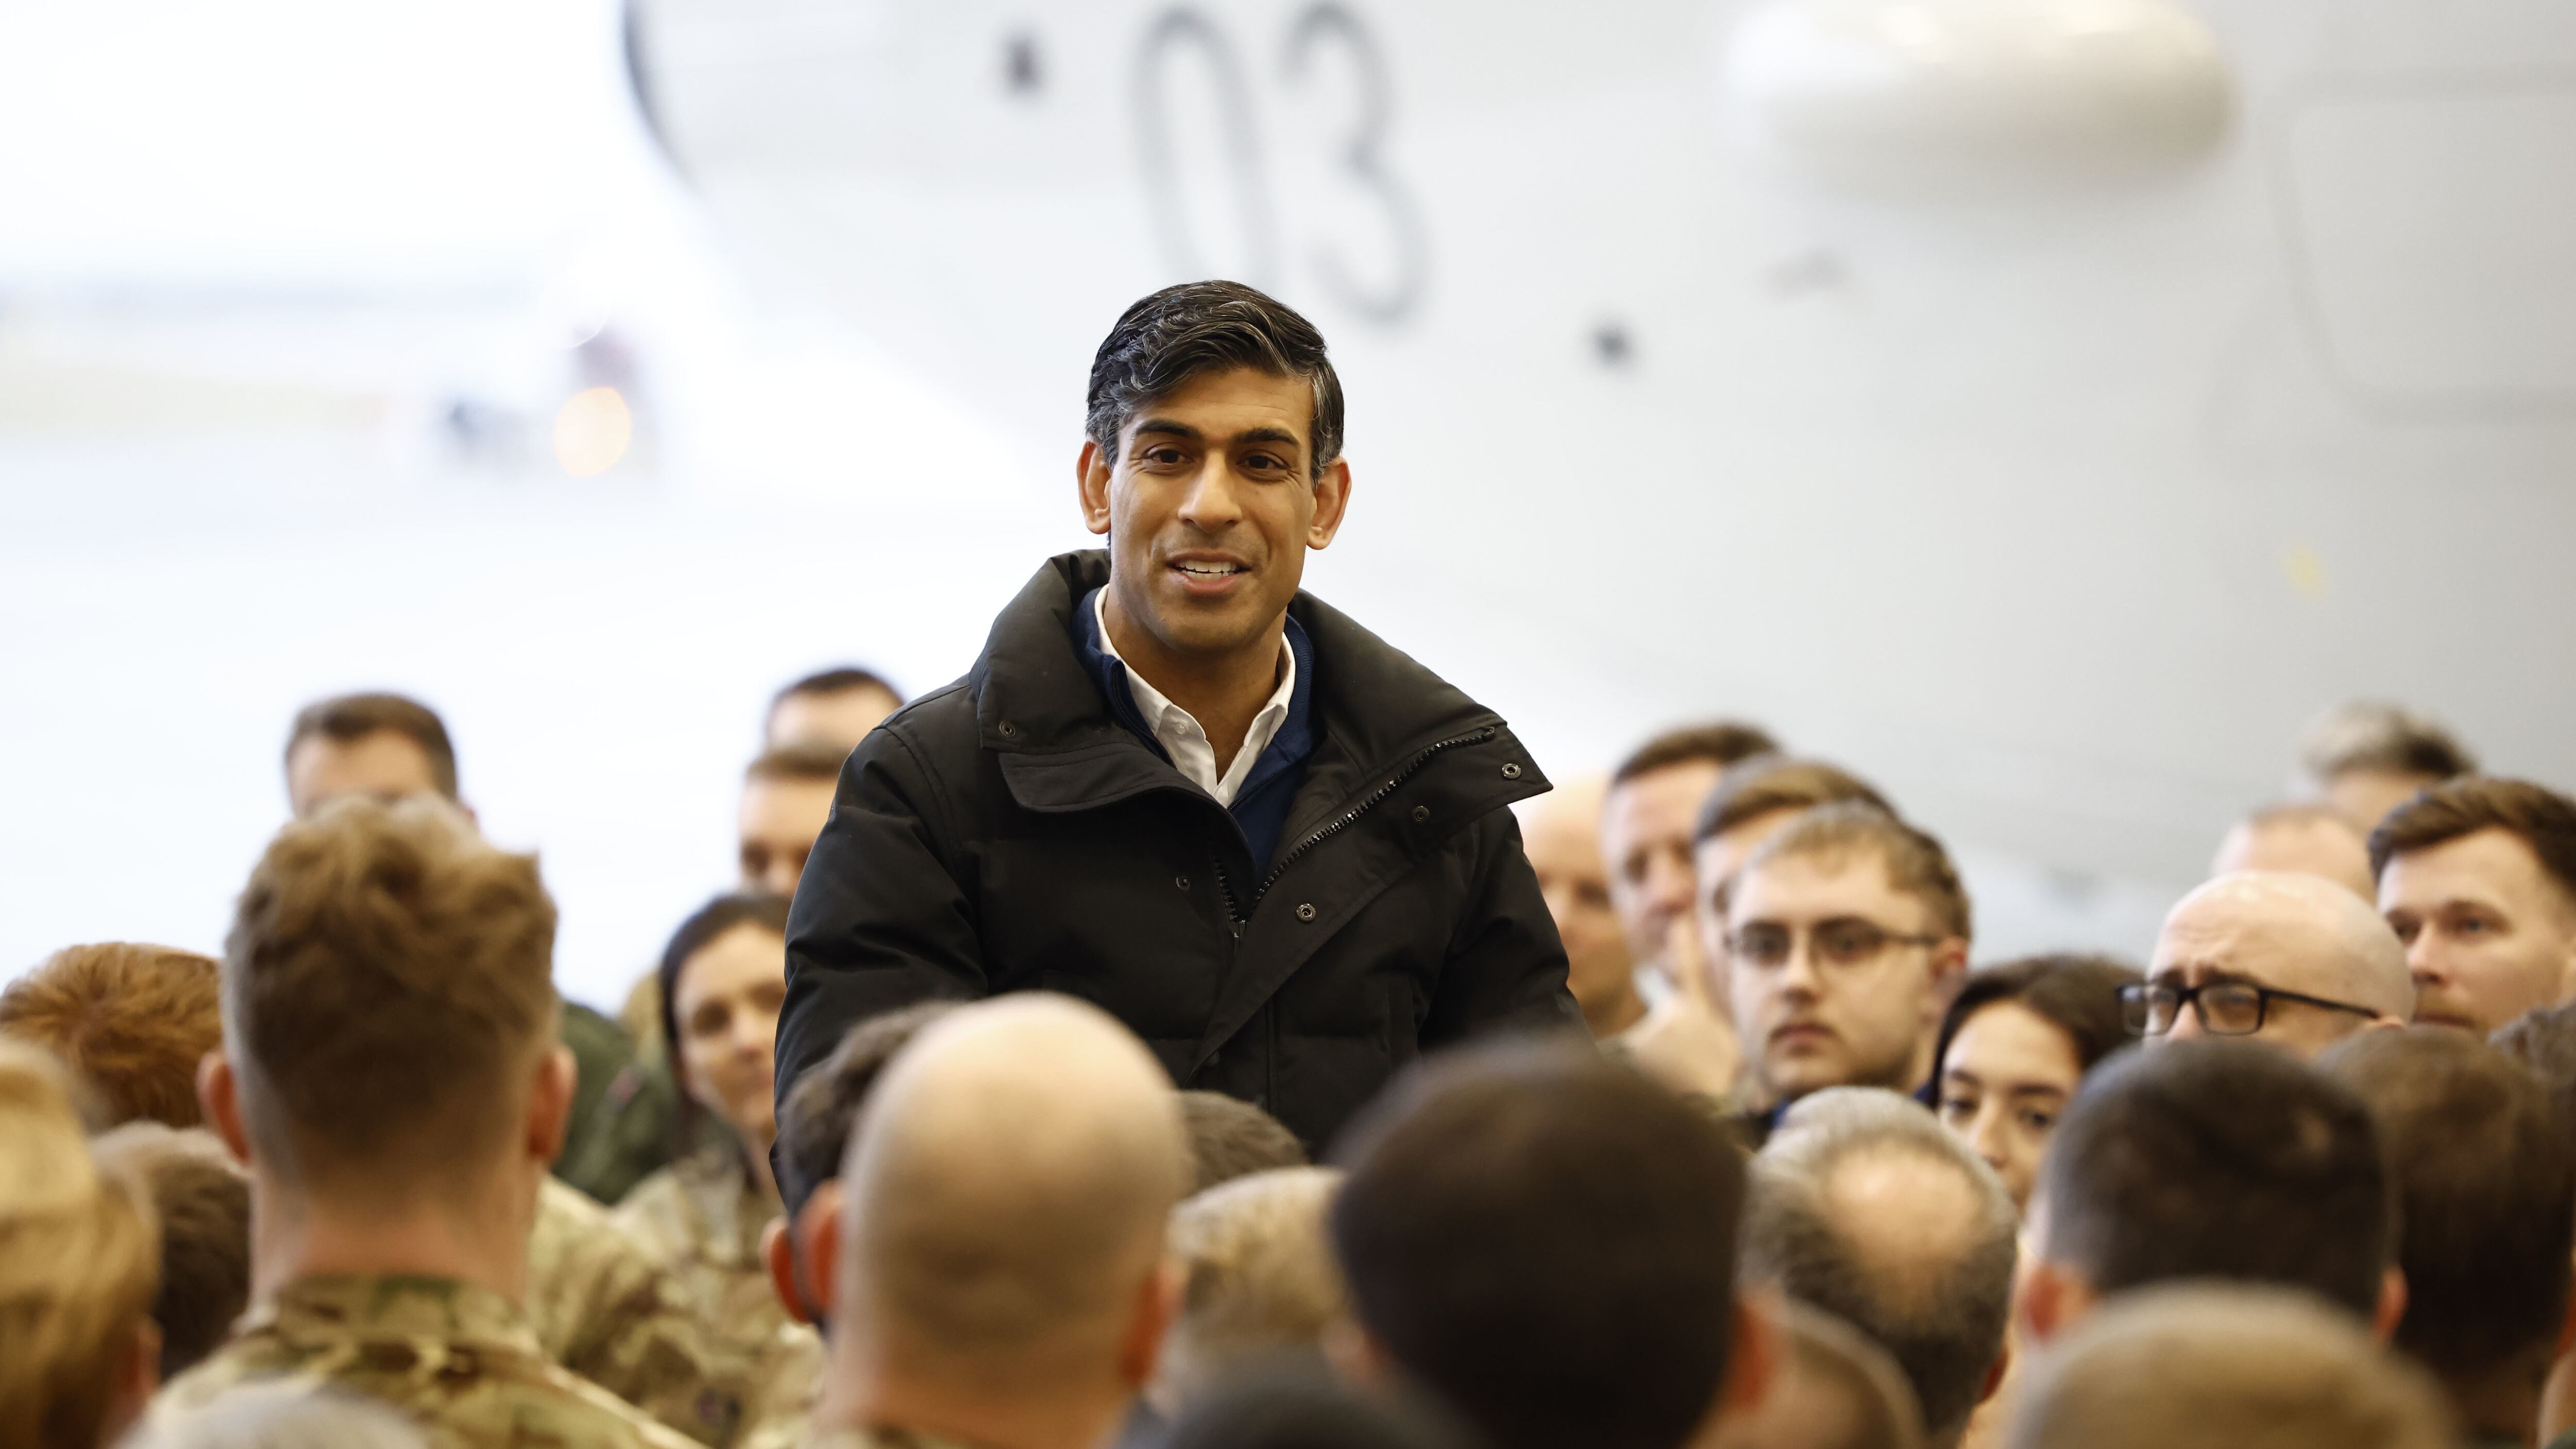 Rishi Sunak proposed the introduction of National Service for 18-year-olds